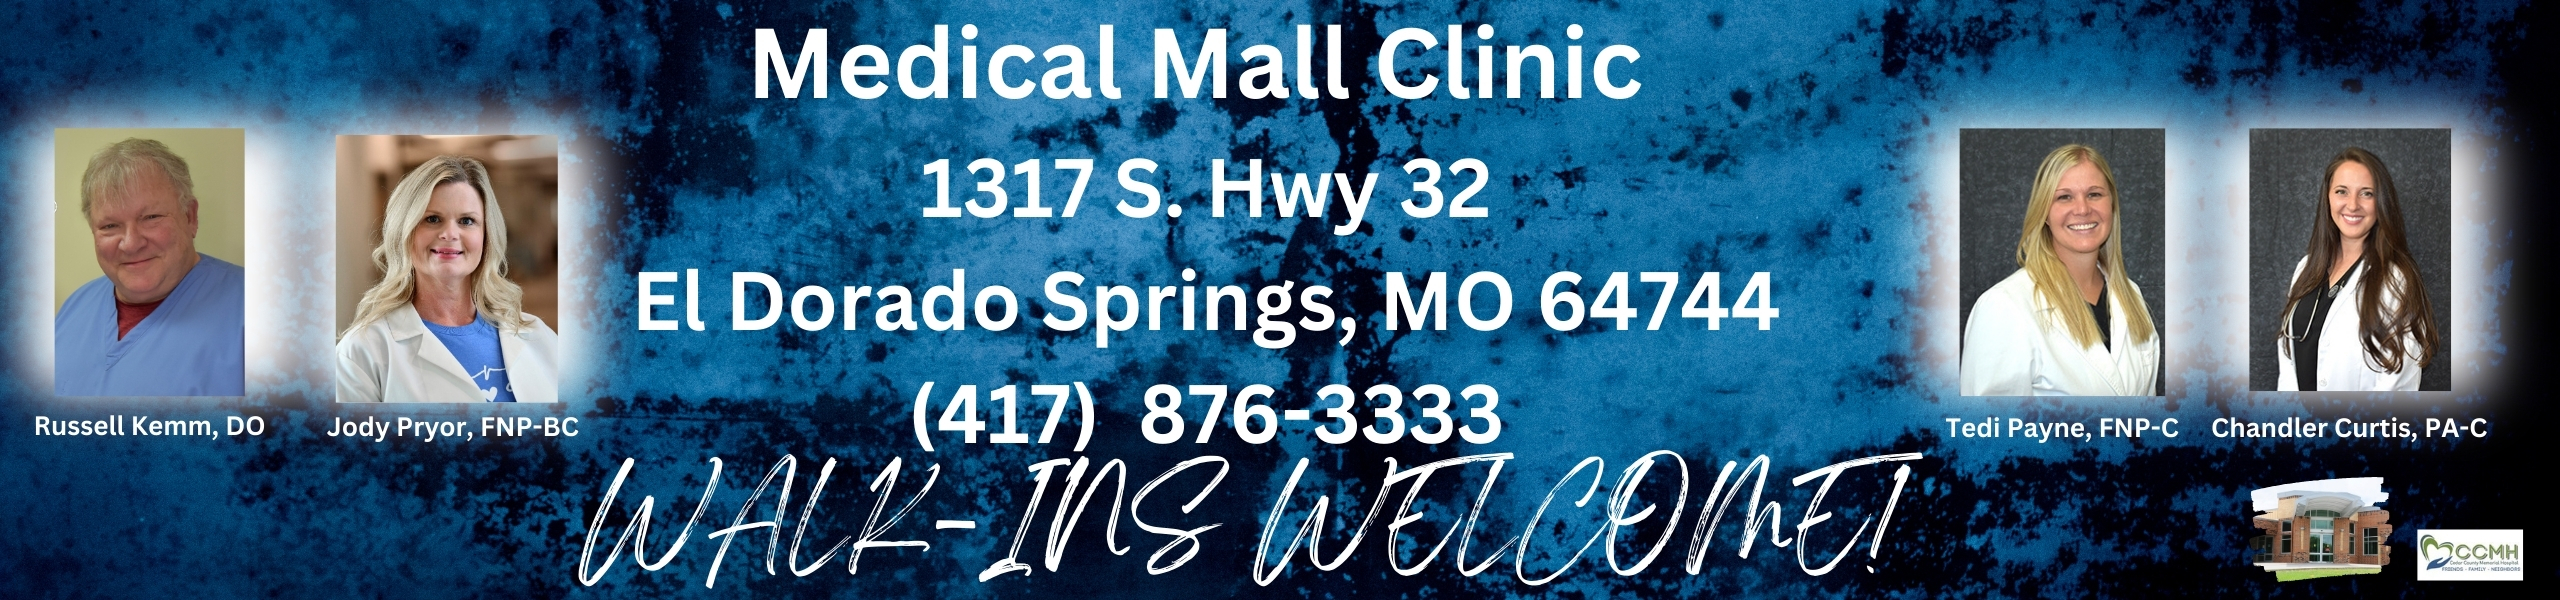 CCMH Medical Mall Clinic 

Call (417) 876-3333 for an appointment

Appointments accepted 8am - 5pm
Monday thru Friday 

1317 S. Highway 32 
El Dorado Springs, MO 64744